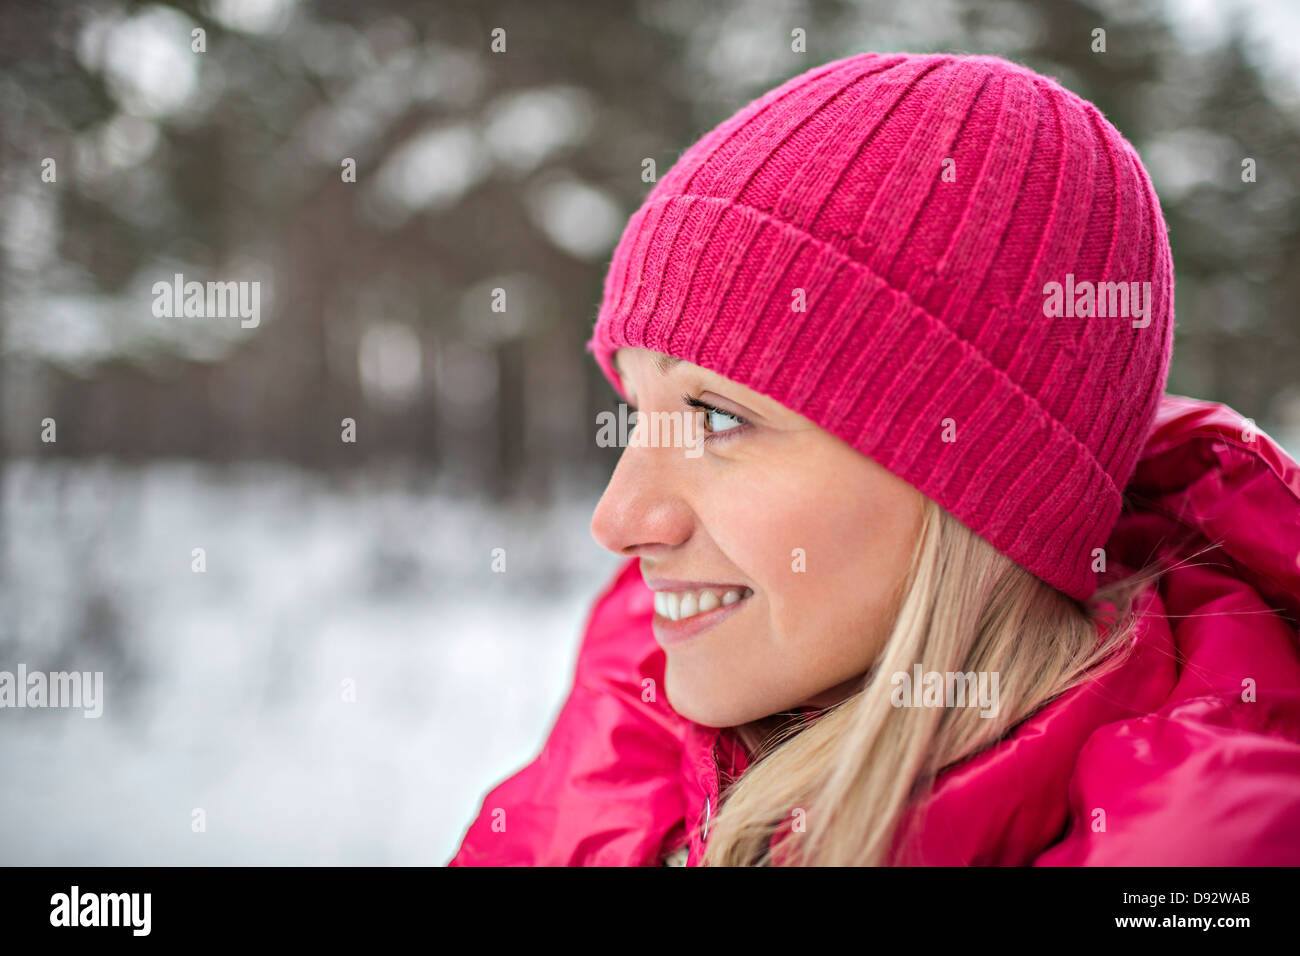 A woman wearing bright pink winter clothing outdoors Stock Photo